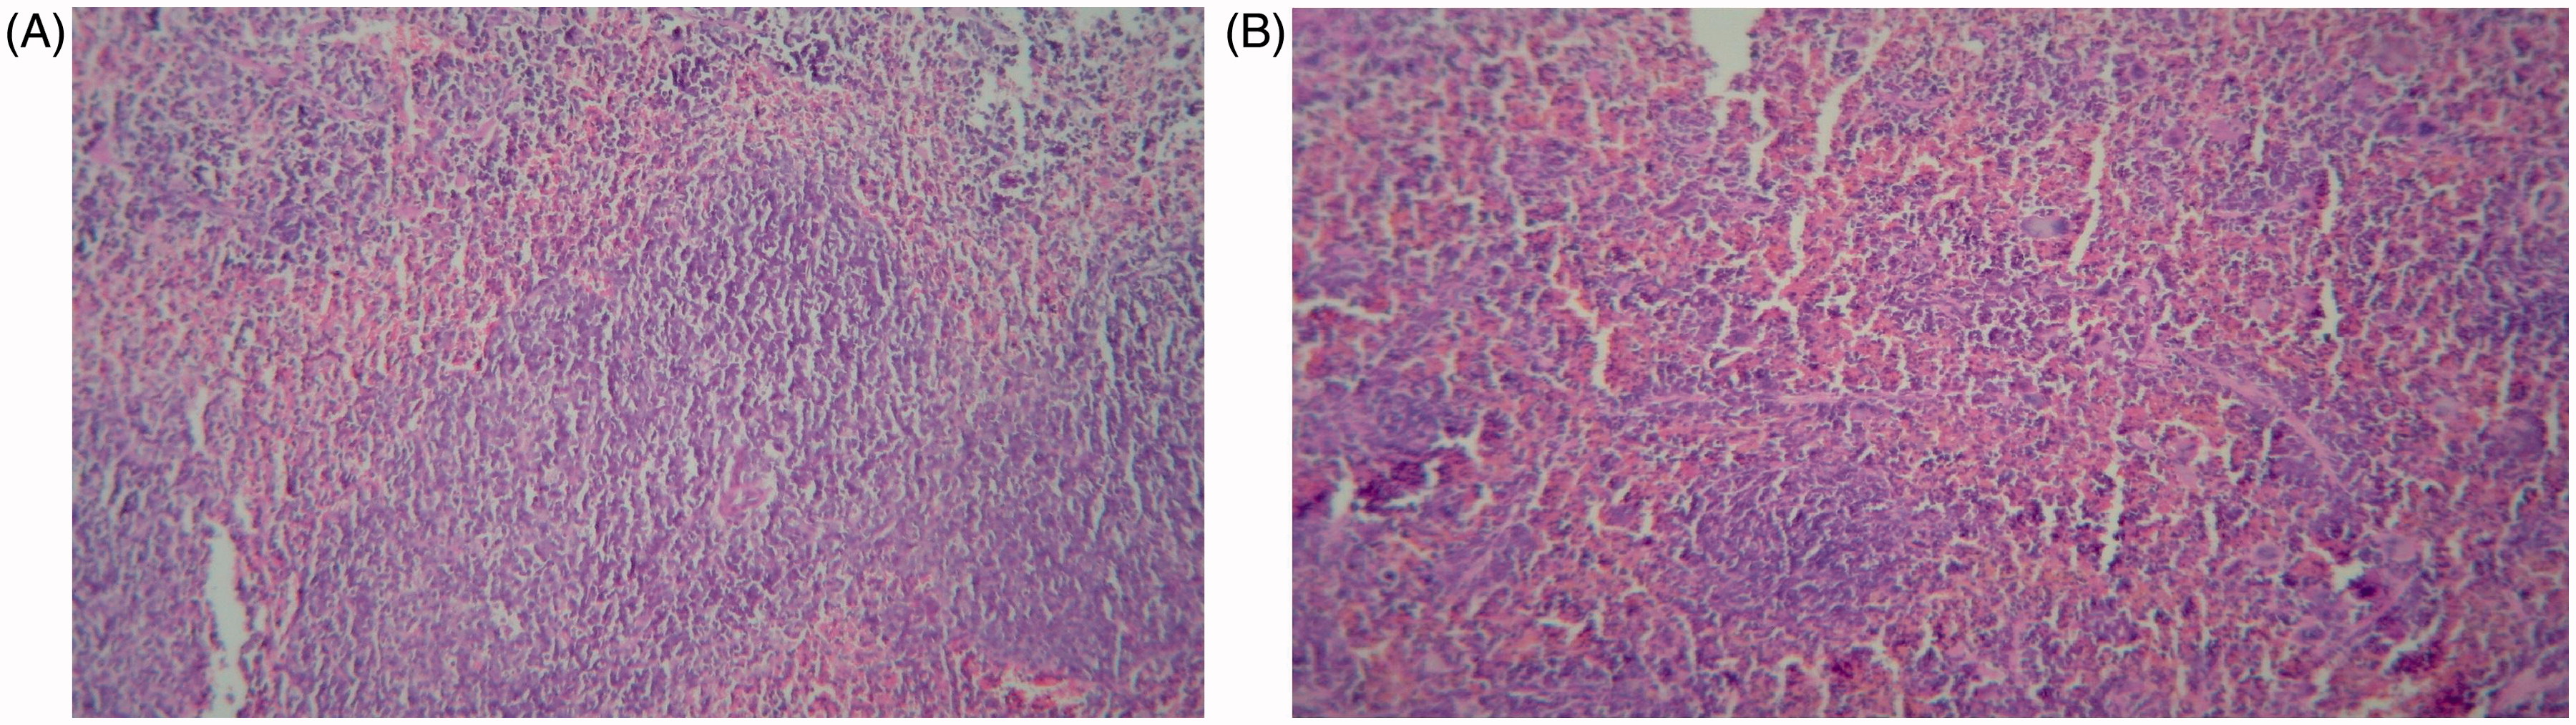 Figure 2. Pathologic changes in spleen after administration of 10 mg BBR/kg/day. (a) Vehicle-control group: White pulps with well-formed lymphoid follicles containing active germinal centers. (b) 10 mg BBR/kg/day group: Atrophic white pulps with relatively small lymphoid follicles. Each figure is a representative photomicrograph from a mouse in each group. Magnification = 100×.